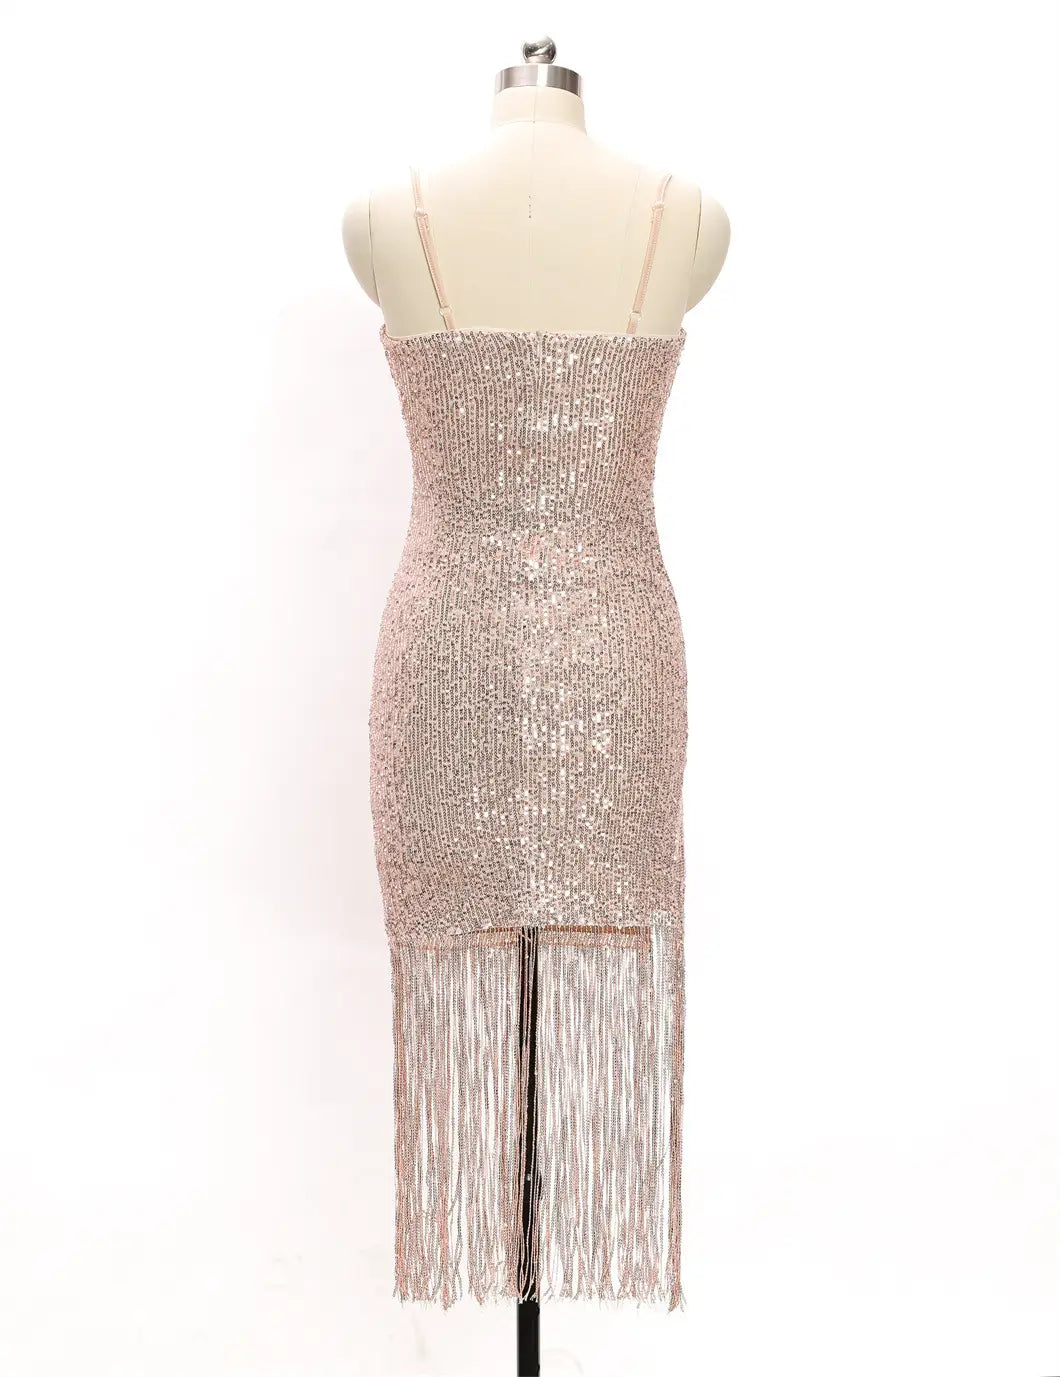 Sultry Sequined Bodycon Cami Dress With Fringe - Party Essential